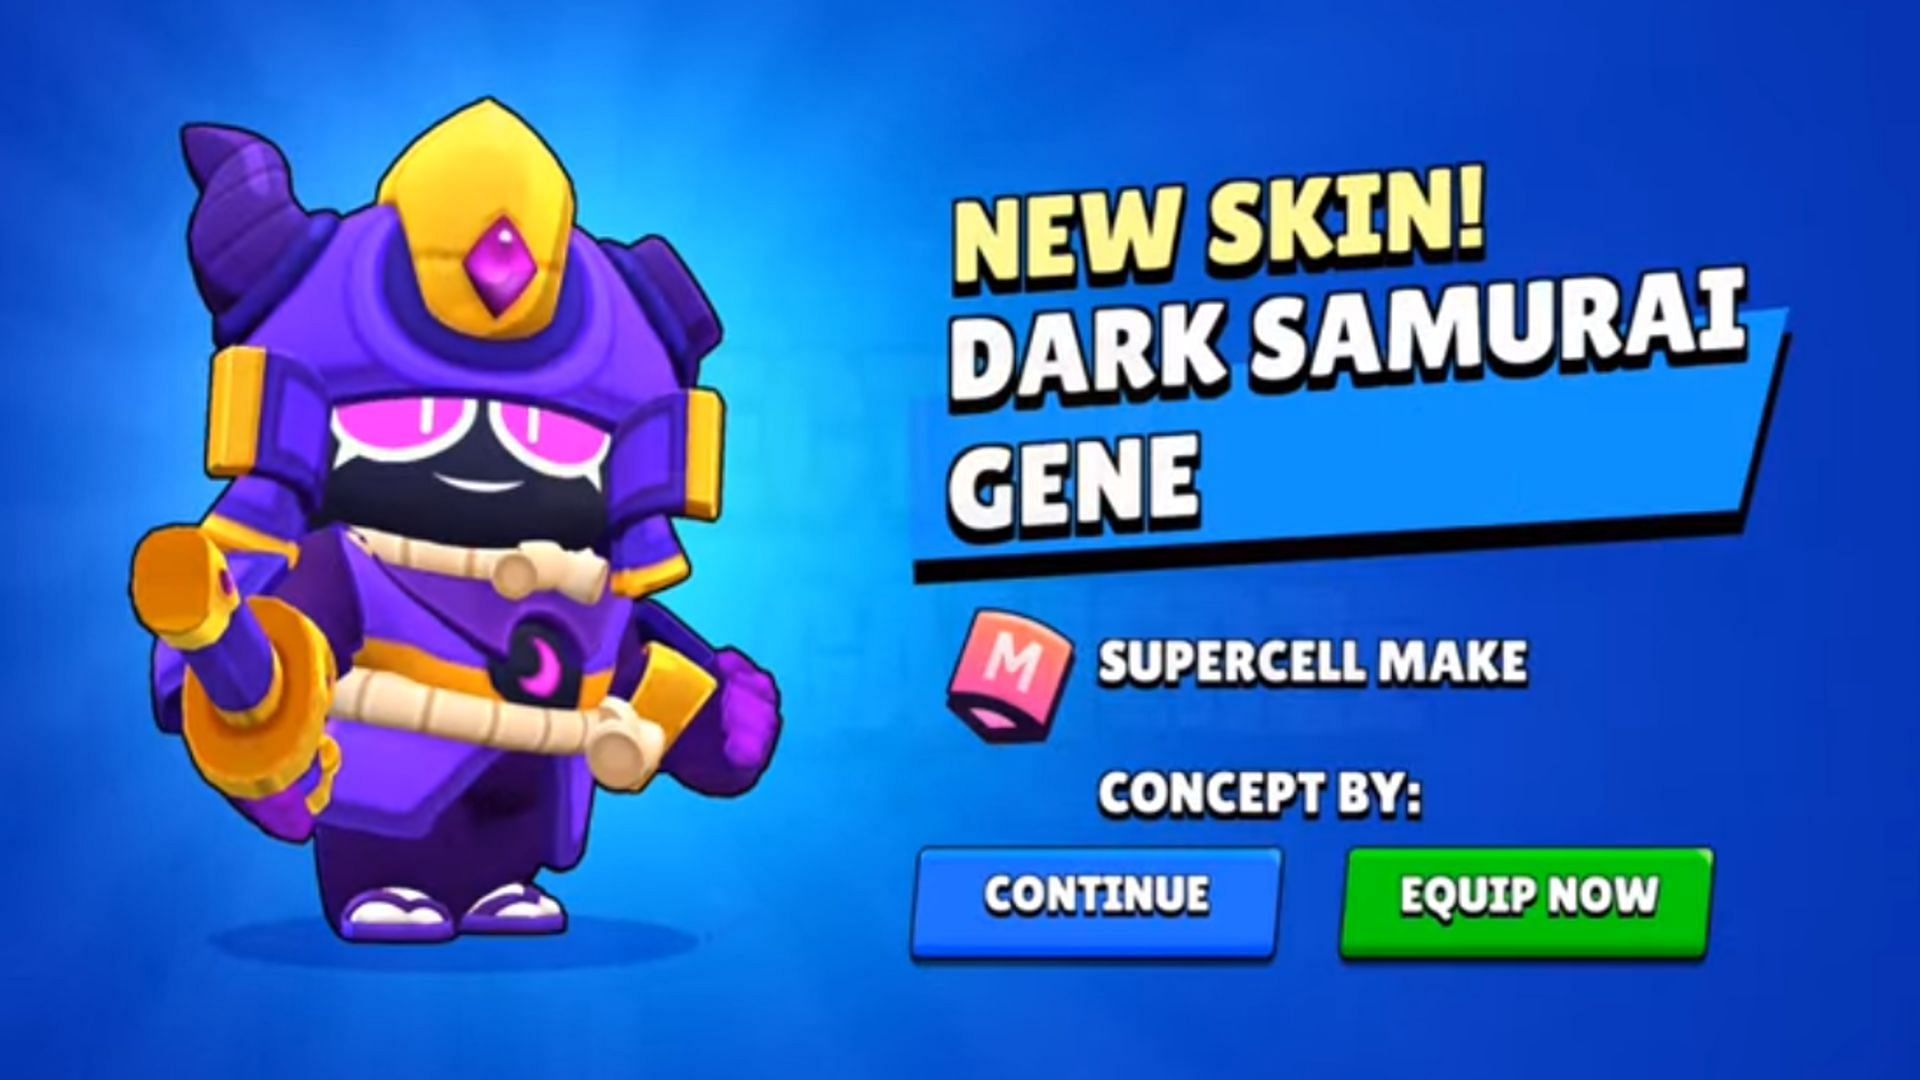 Aesthetic design (Image via Supercell)